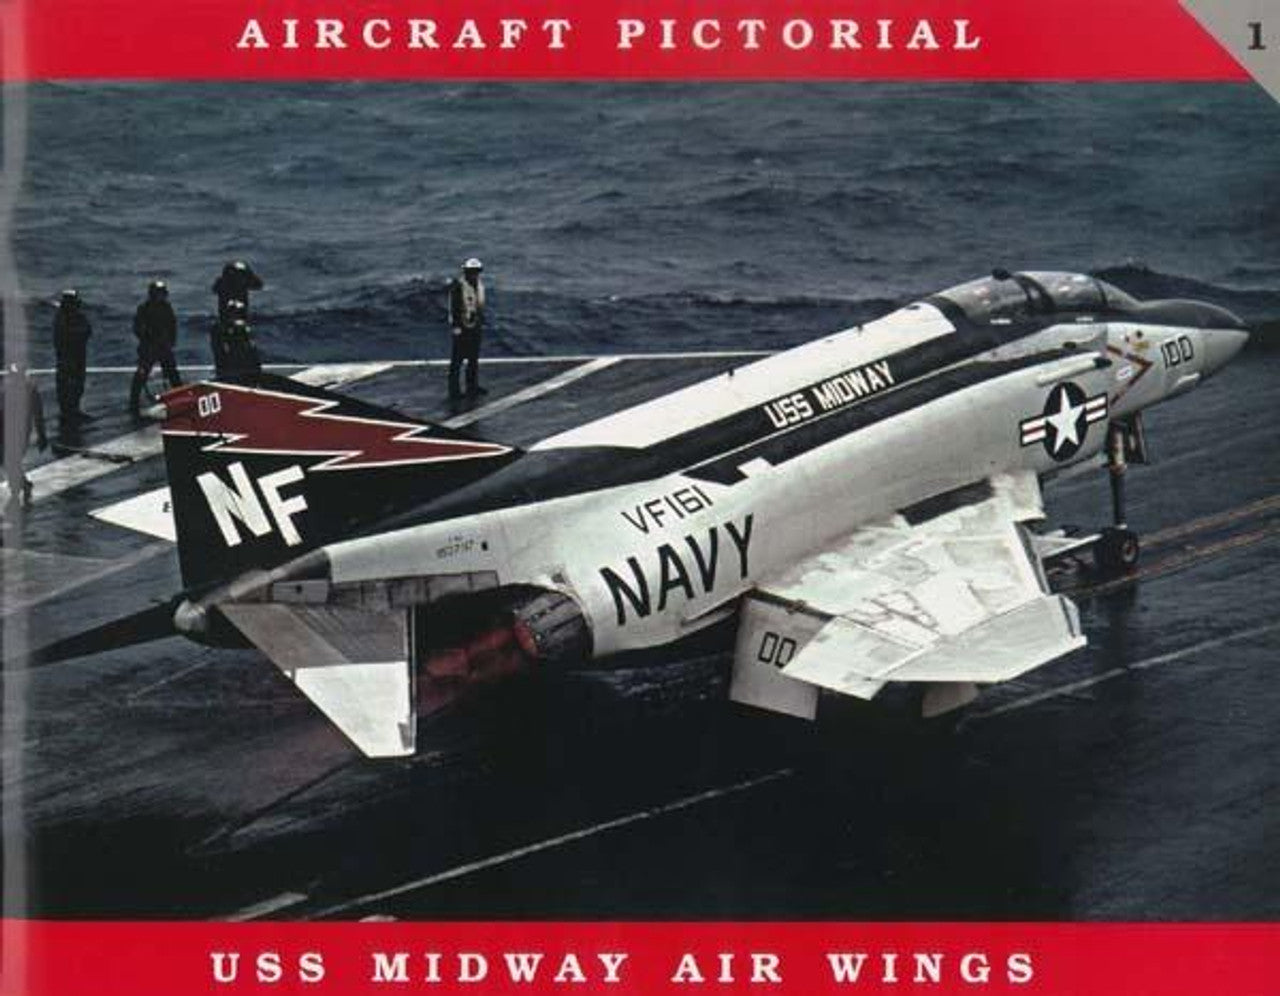 CWPA01 Classic Warship Publishing Aircraft Pictorial, USS Midway Air Wings Book.  NEW!